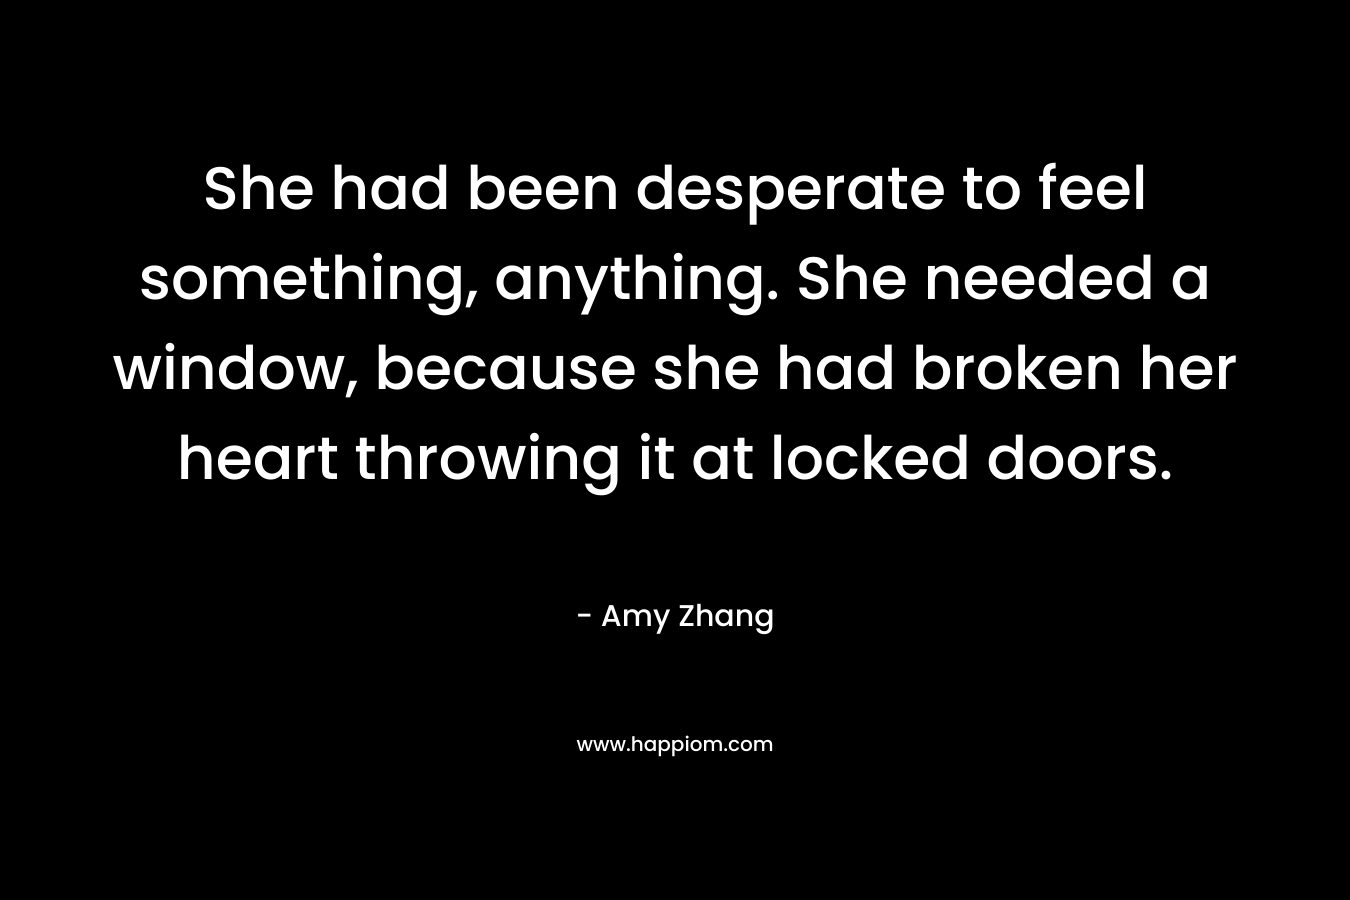 She had been desperate to feel something, anything. She needed a window, because she had broken her heart throwing it at locked doors. – Amy Zhang